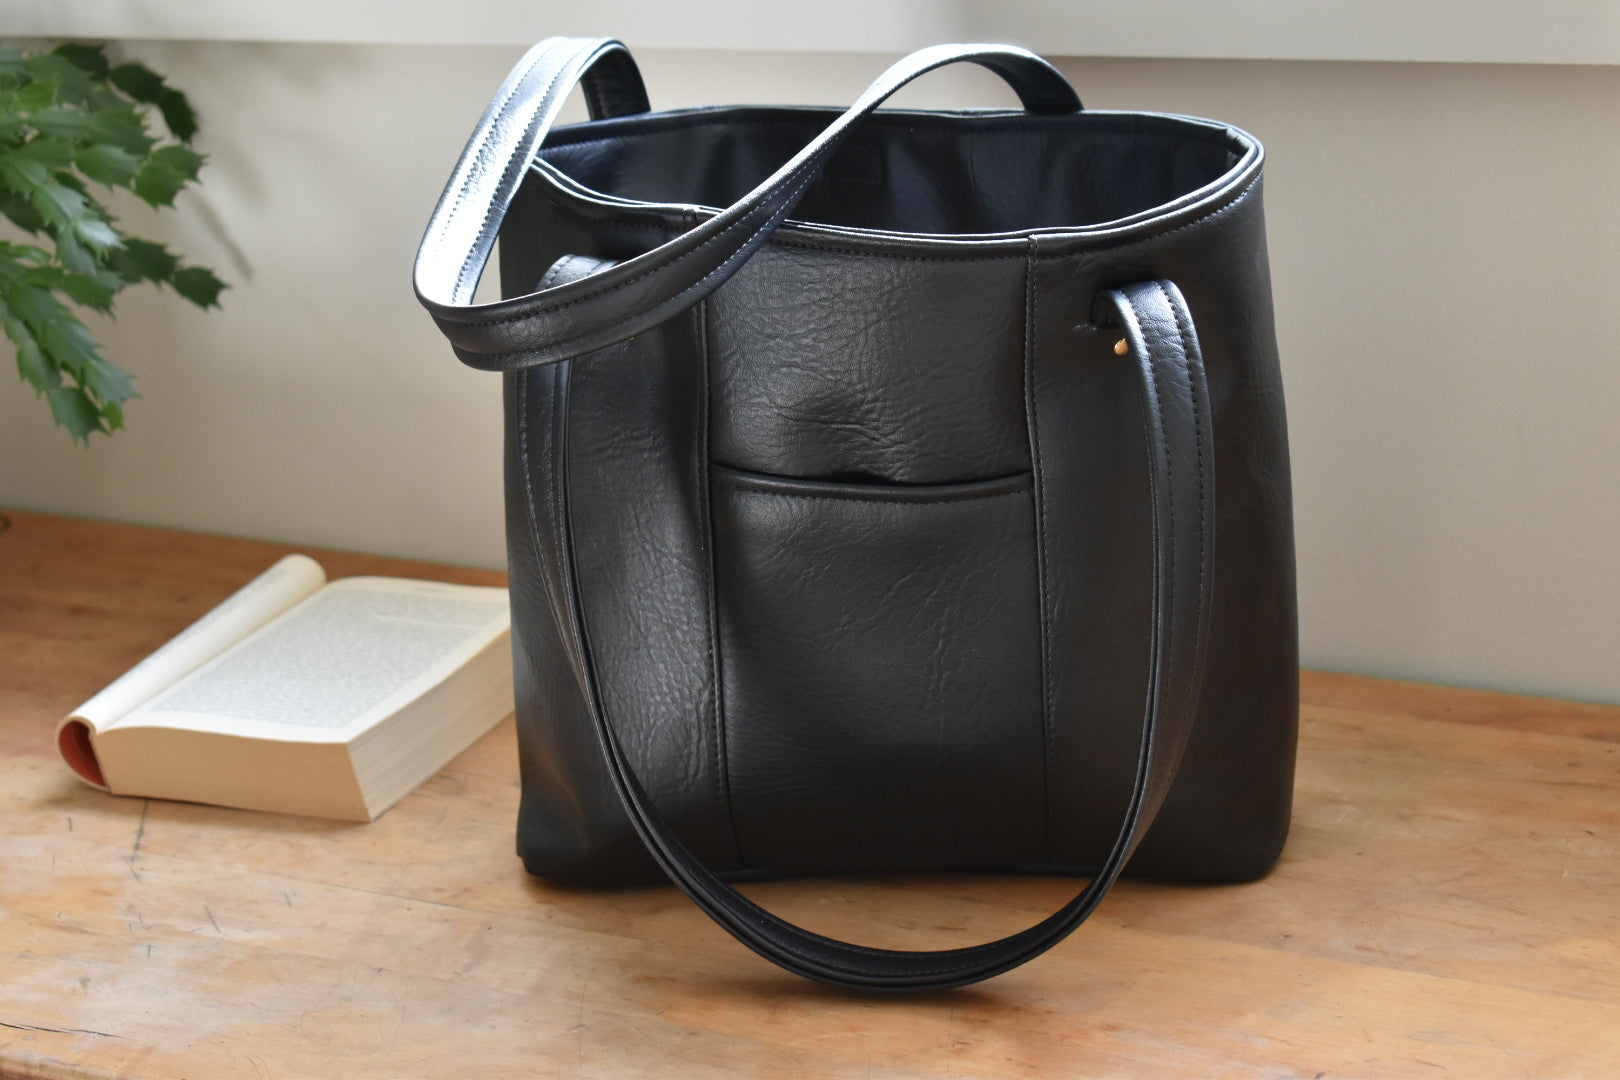 The Leah Tote  Simply Classic